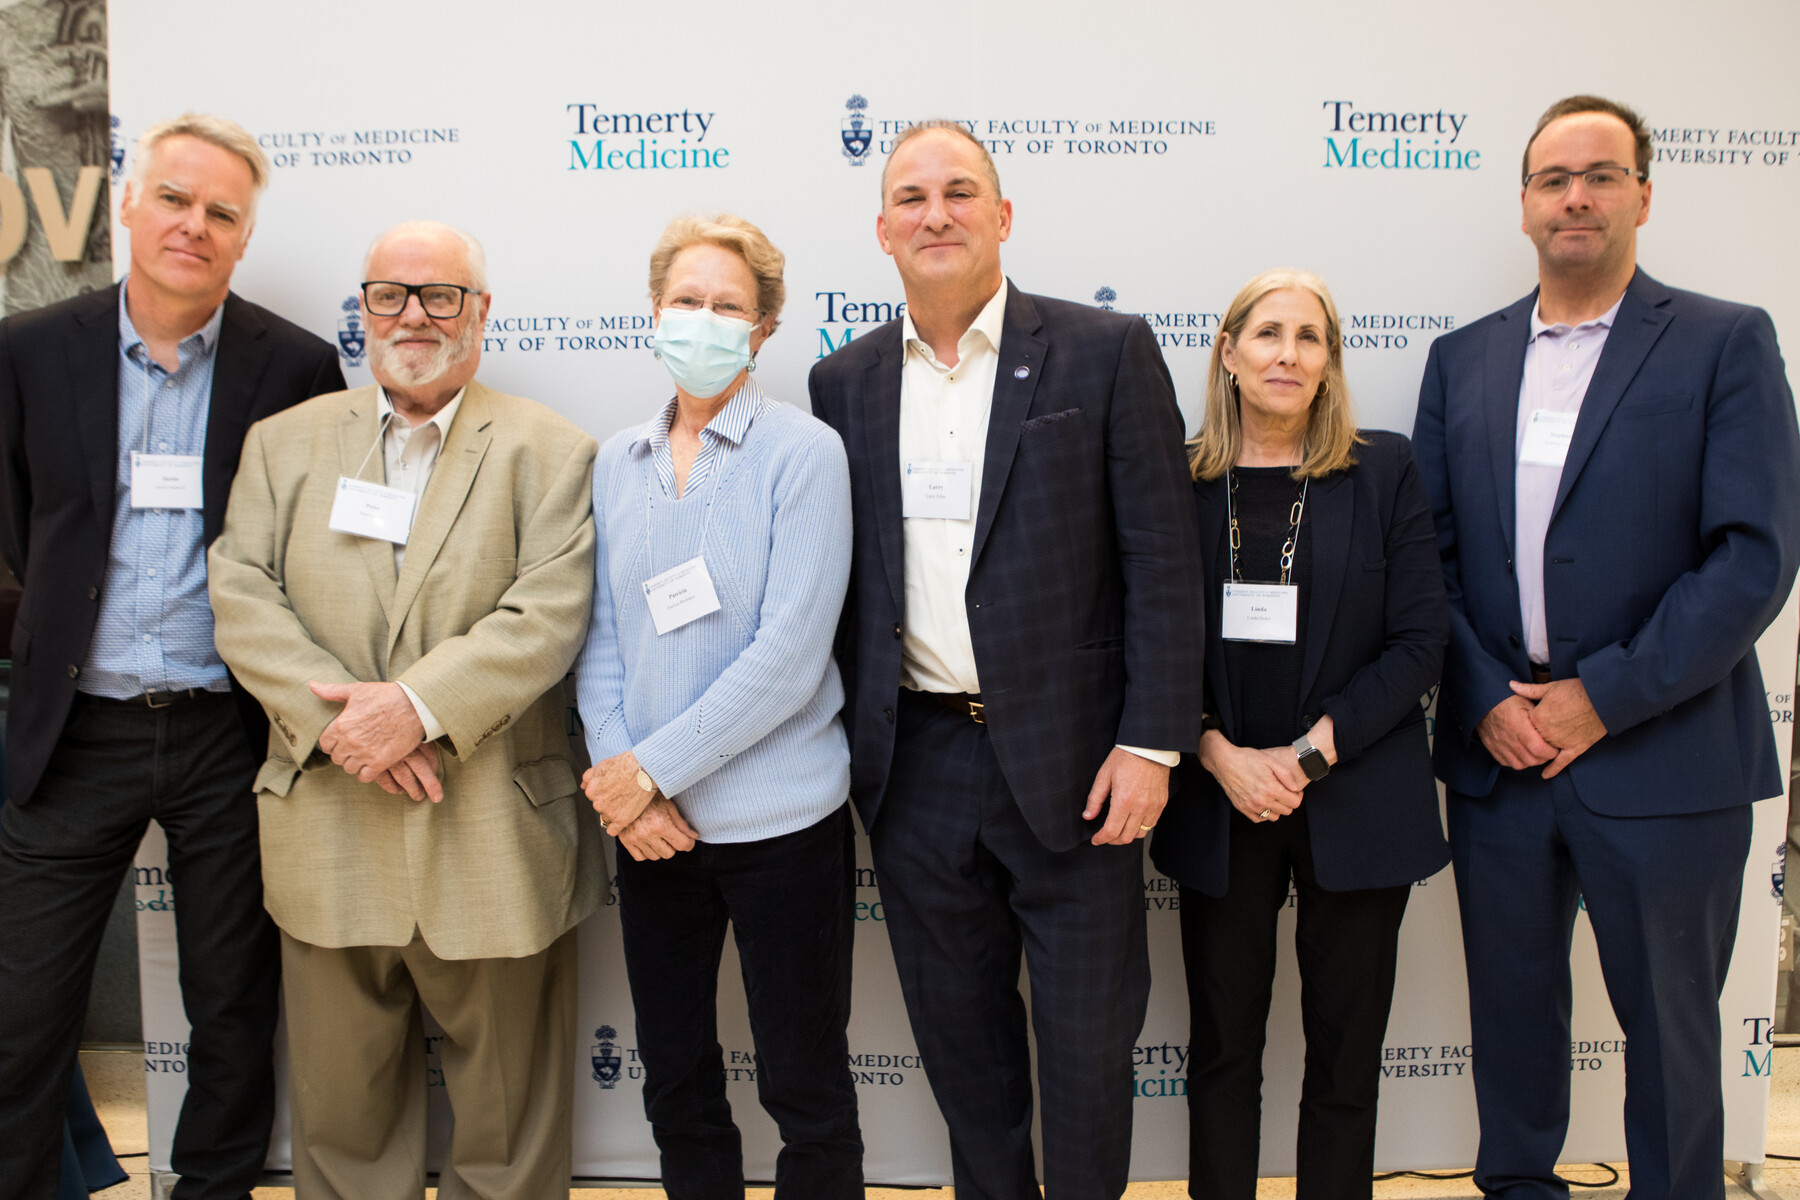 Group photo of six people standing in front of Temerty Faculty of Medicine branded backdrop